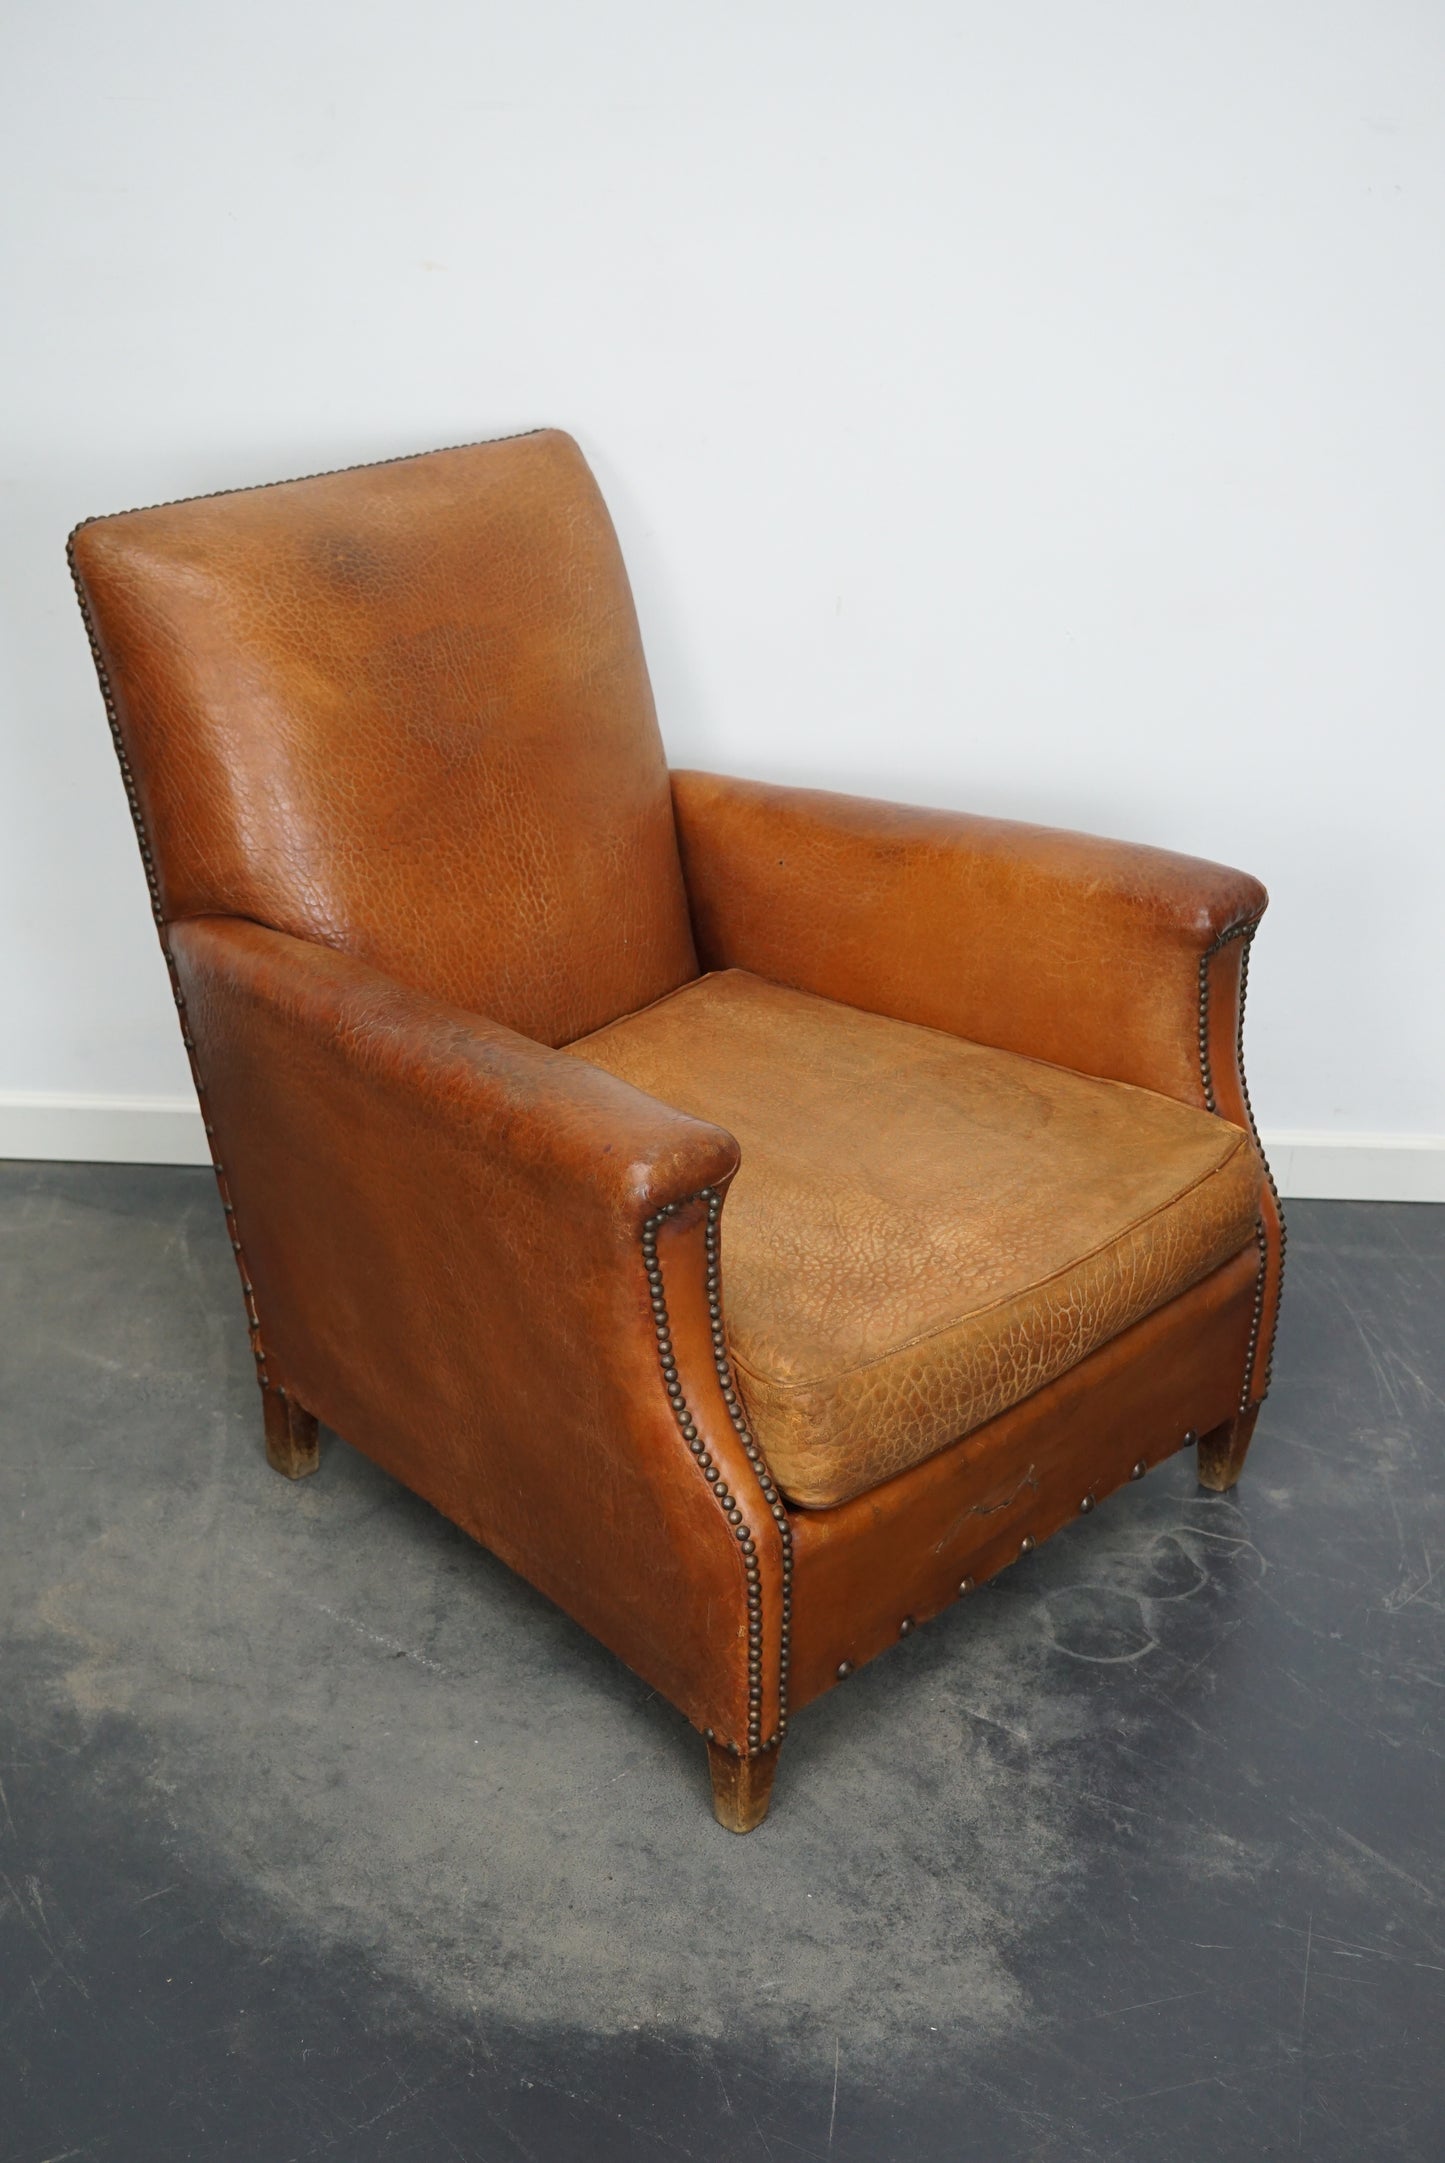 Vintage French Cognac-Colored Leather Club Chair, 1940s